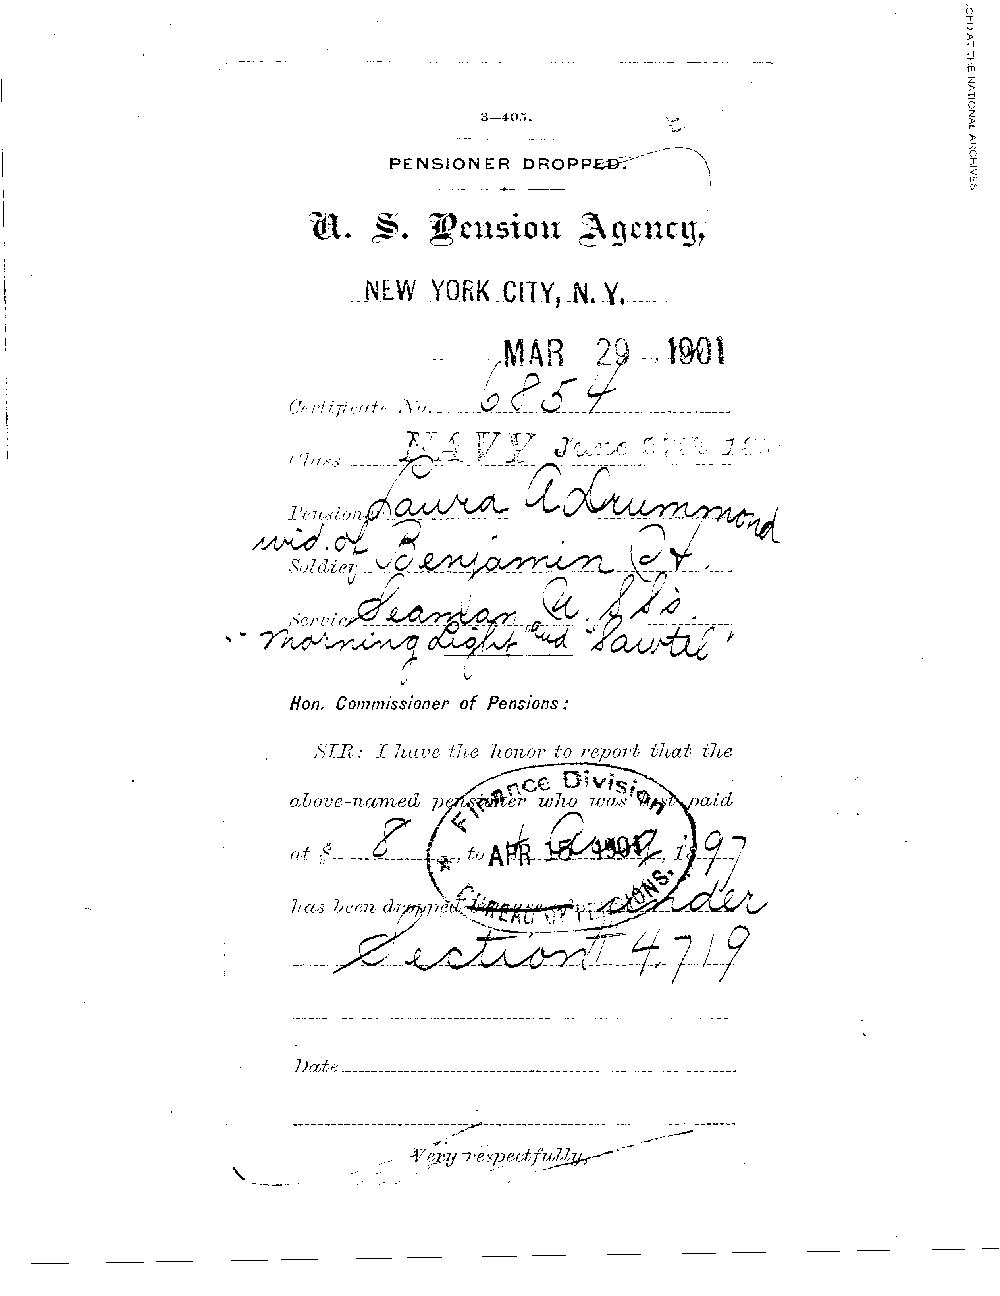 On April 15, 1901, the pension granted to Laura Drummond, widow of Benjamin Drummond 
(the first patient admitted into the Naval Hospital, Washington City, when it opened on 
October 1, 1866) was dropped, presumably on her death.